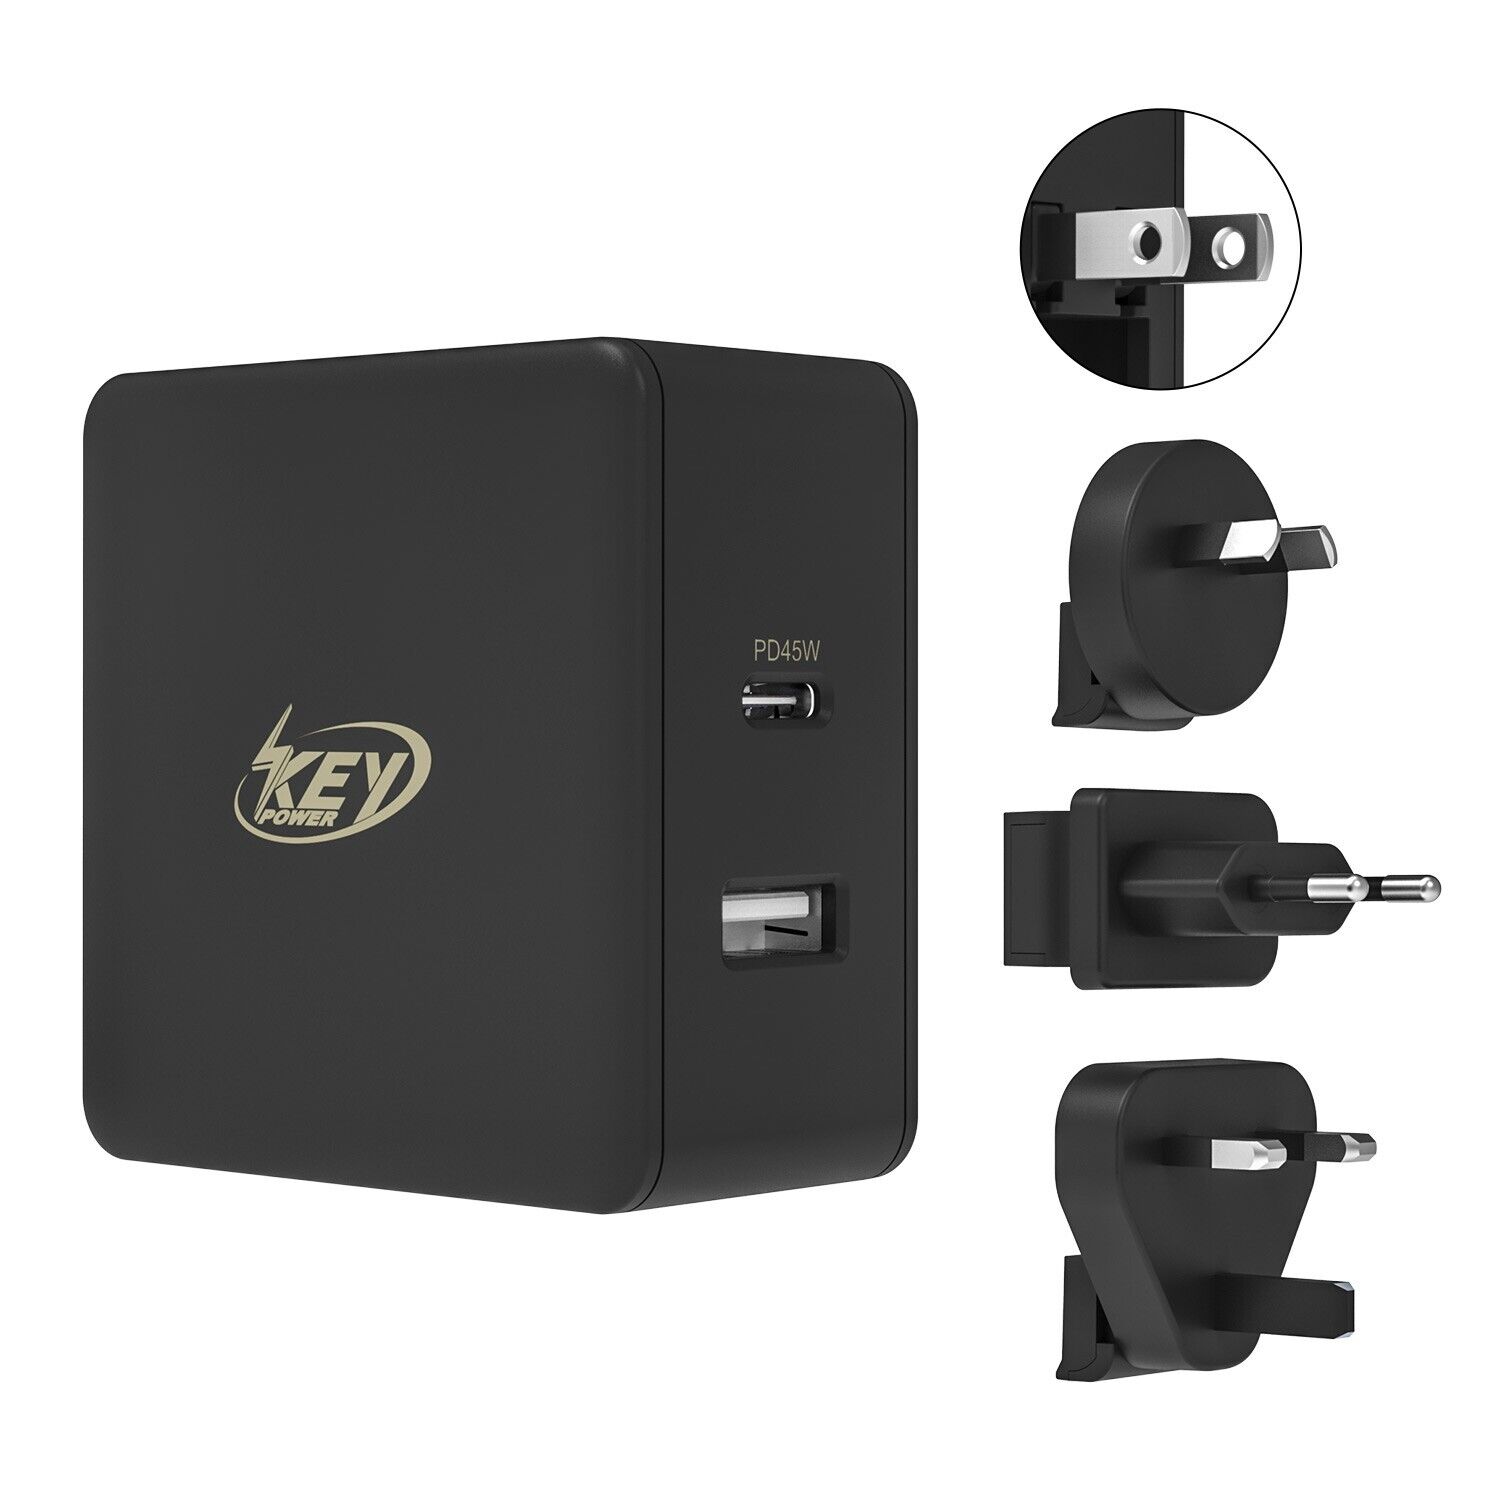 Key Power 45W Type-C PD Wall Charger, USB-C Power Adapter